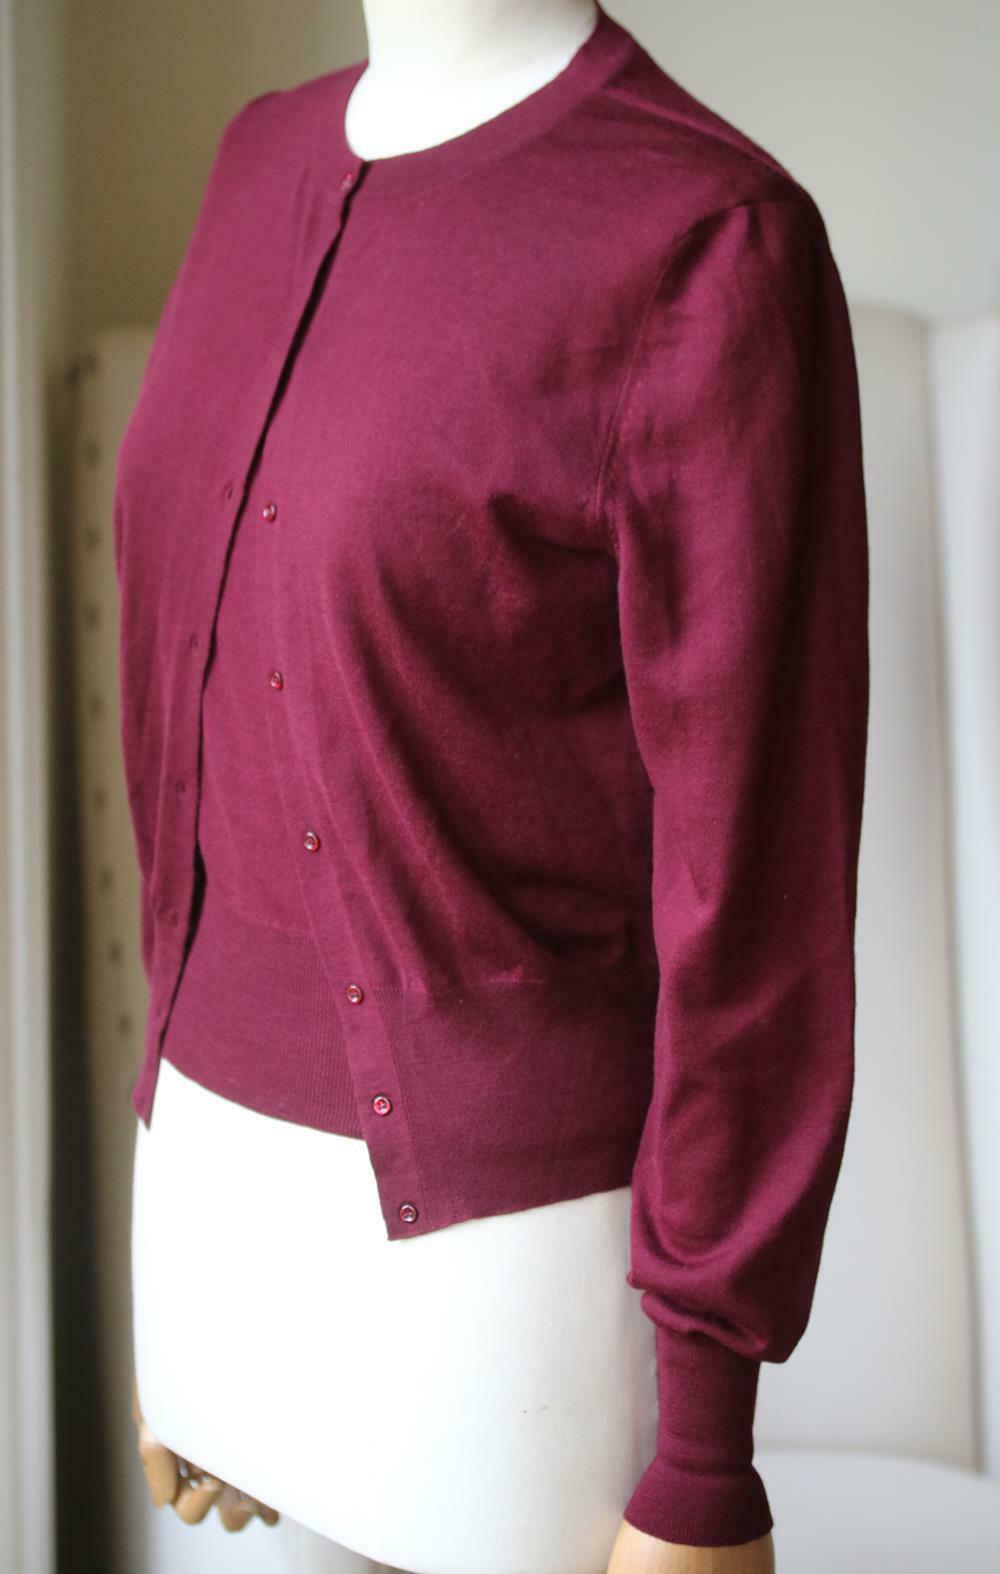 This cardigan and top set is spun from luxuriously soft wool in a semi-cropped silhouette that highlights your slimmest point. Burgundy wool. Button fastenings down the front. 100% wool. Colour: Burgundy. Made in Italy.

Size: FR 40 (UK 12, US 8, IT